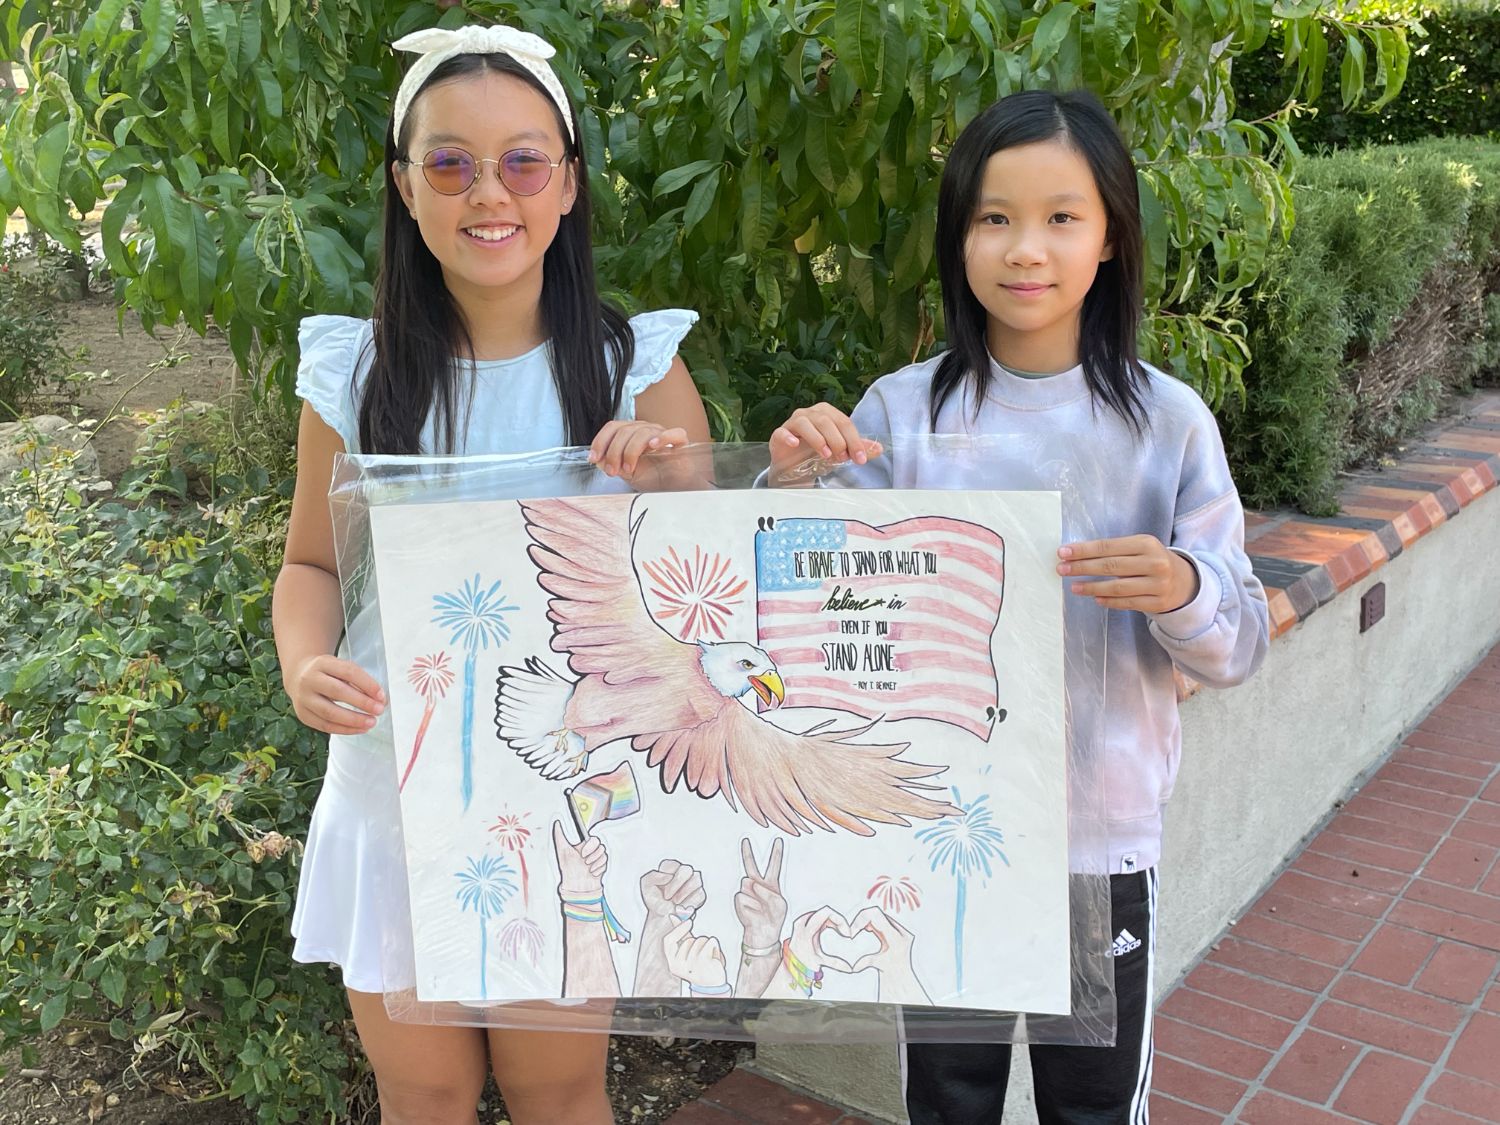 PHOTO: SPARC | The South Pasadenan | 4th of July poster contest finalists Makayla Chang and Tami Yu with their entry "Soaring Together".